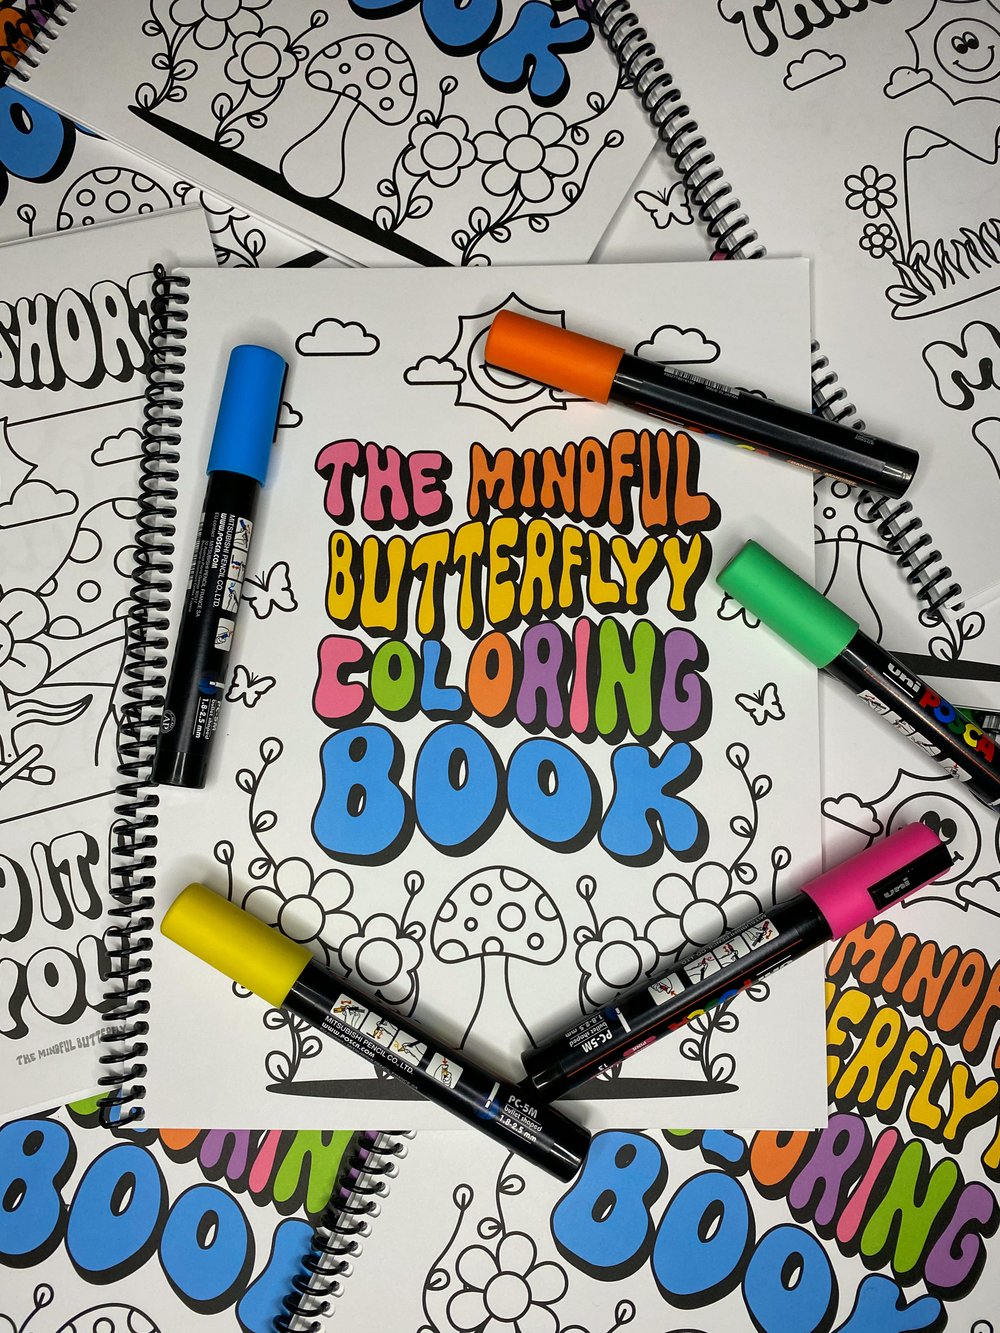 The Mindful Butterflyy Coloring Book